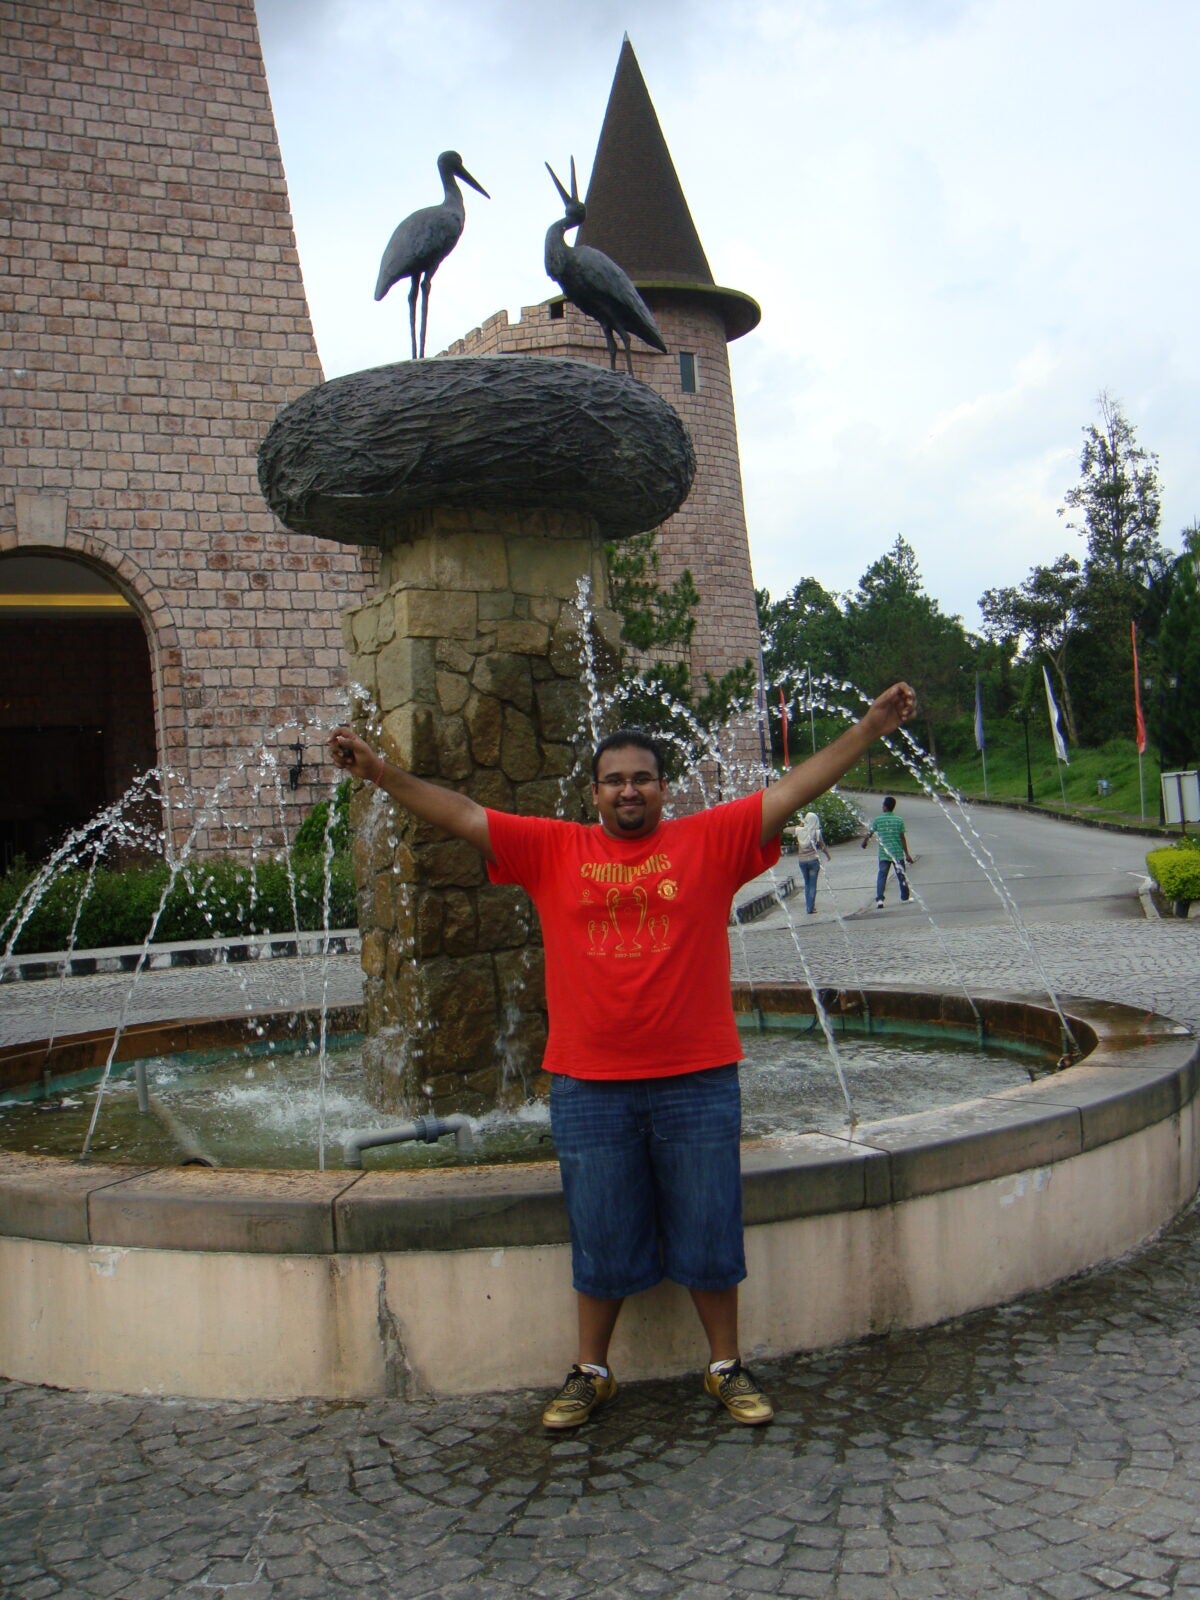 An Indian Obese Man Stand Posing In Front Of A Fountain.